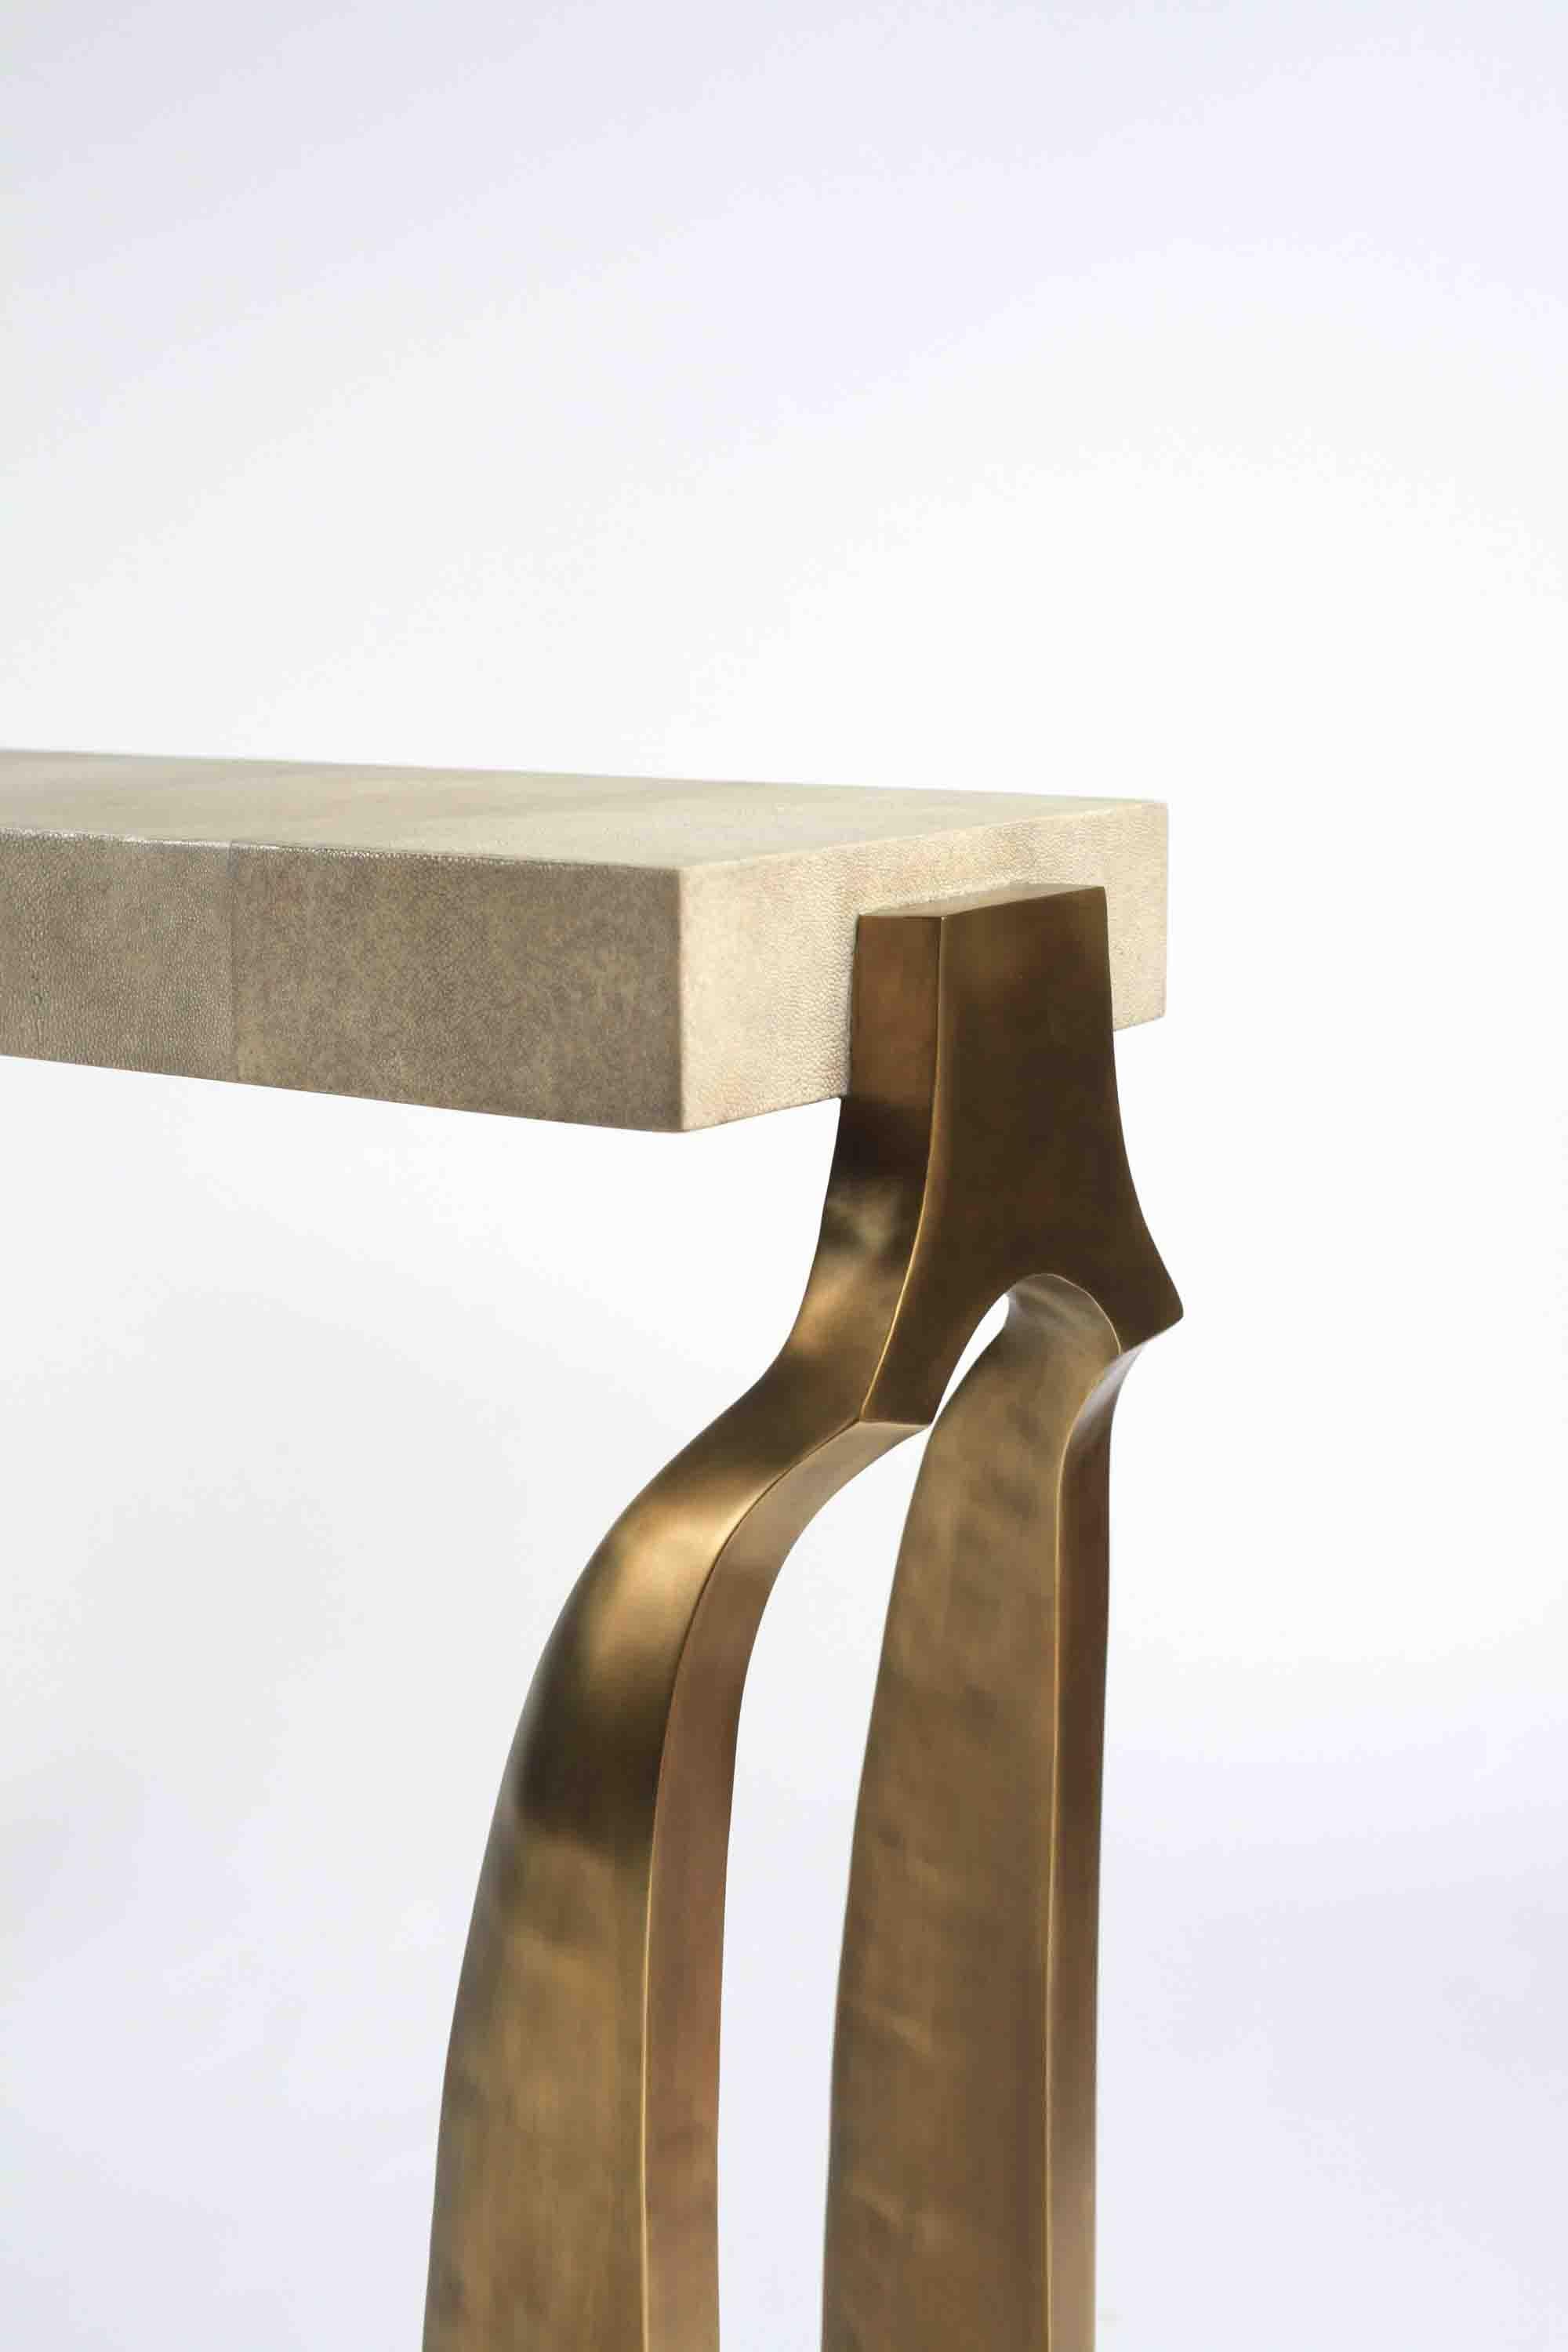 The Galaxy console table is both dramatic and organic it’s unique design. The cream shagreen inlaid top sits on a pair of ethereal and sculptural bronze-patina brass legs. This console table also comes in a writing desk version, see image at end of